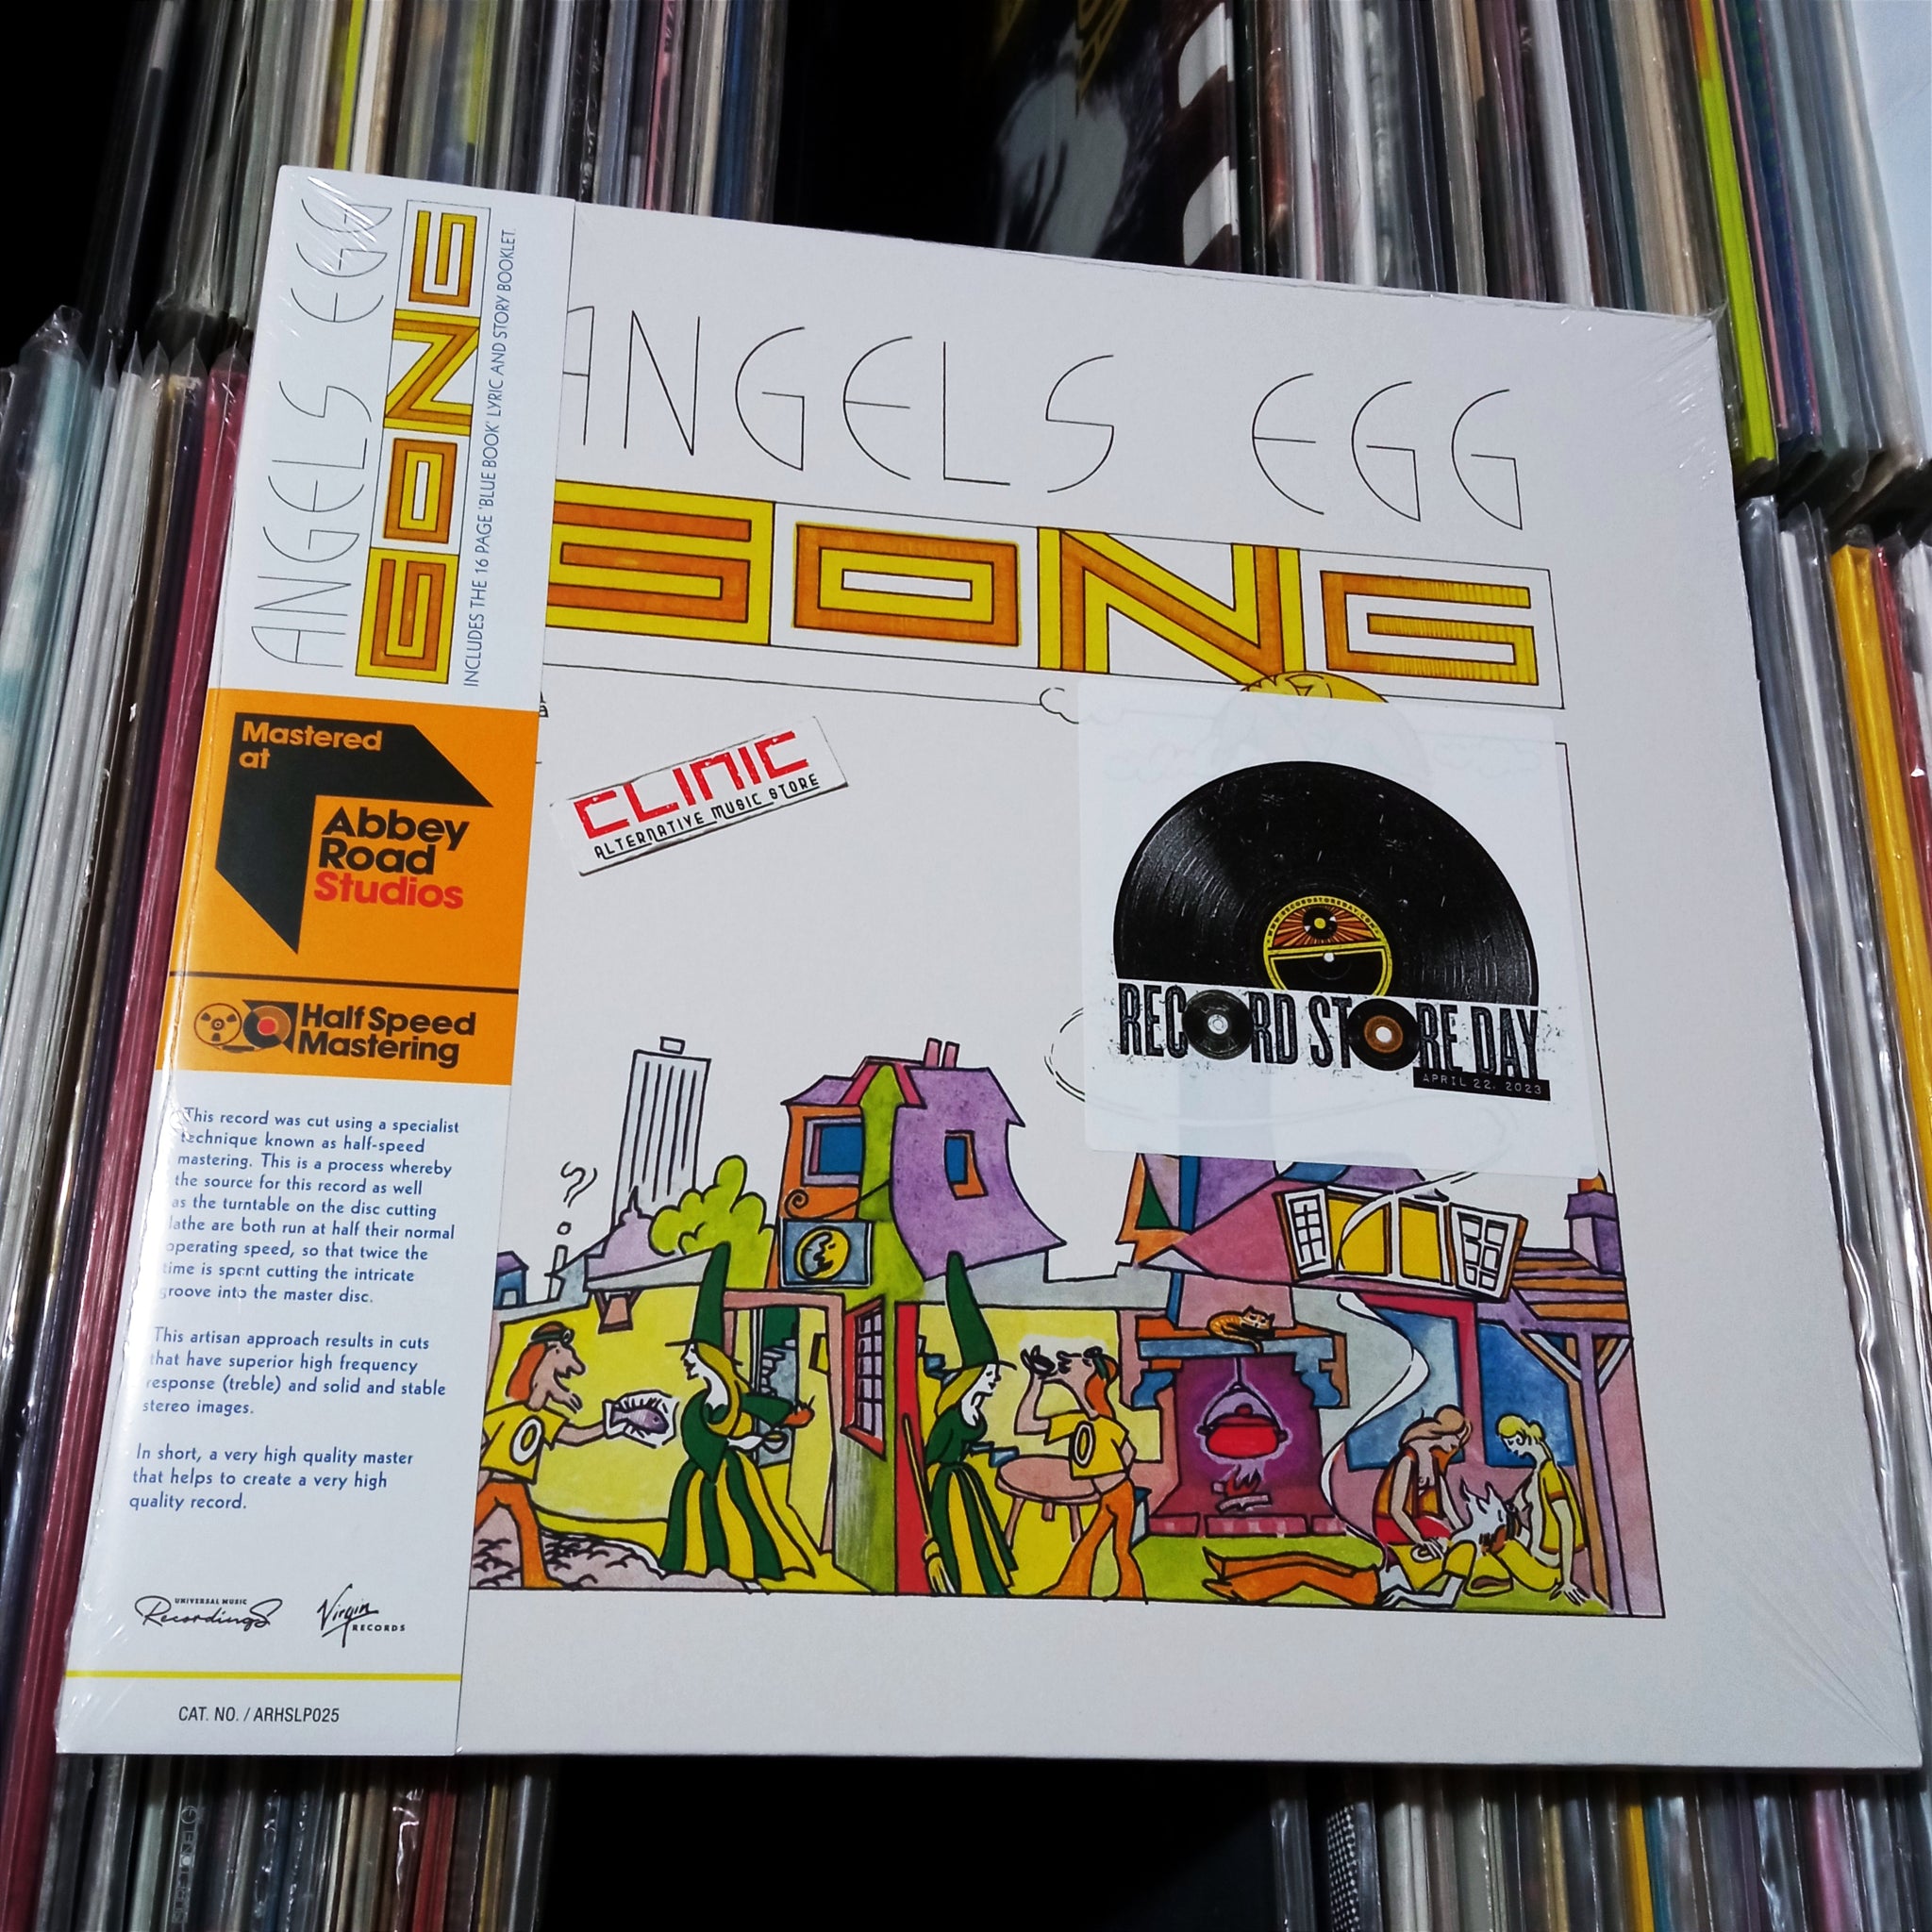 LP - GONG - ANGEL'S EGG - Record Store Day